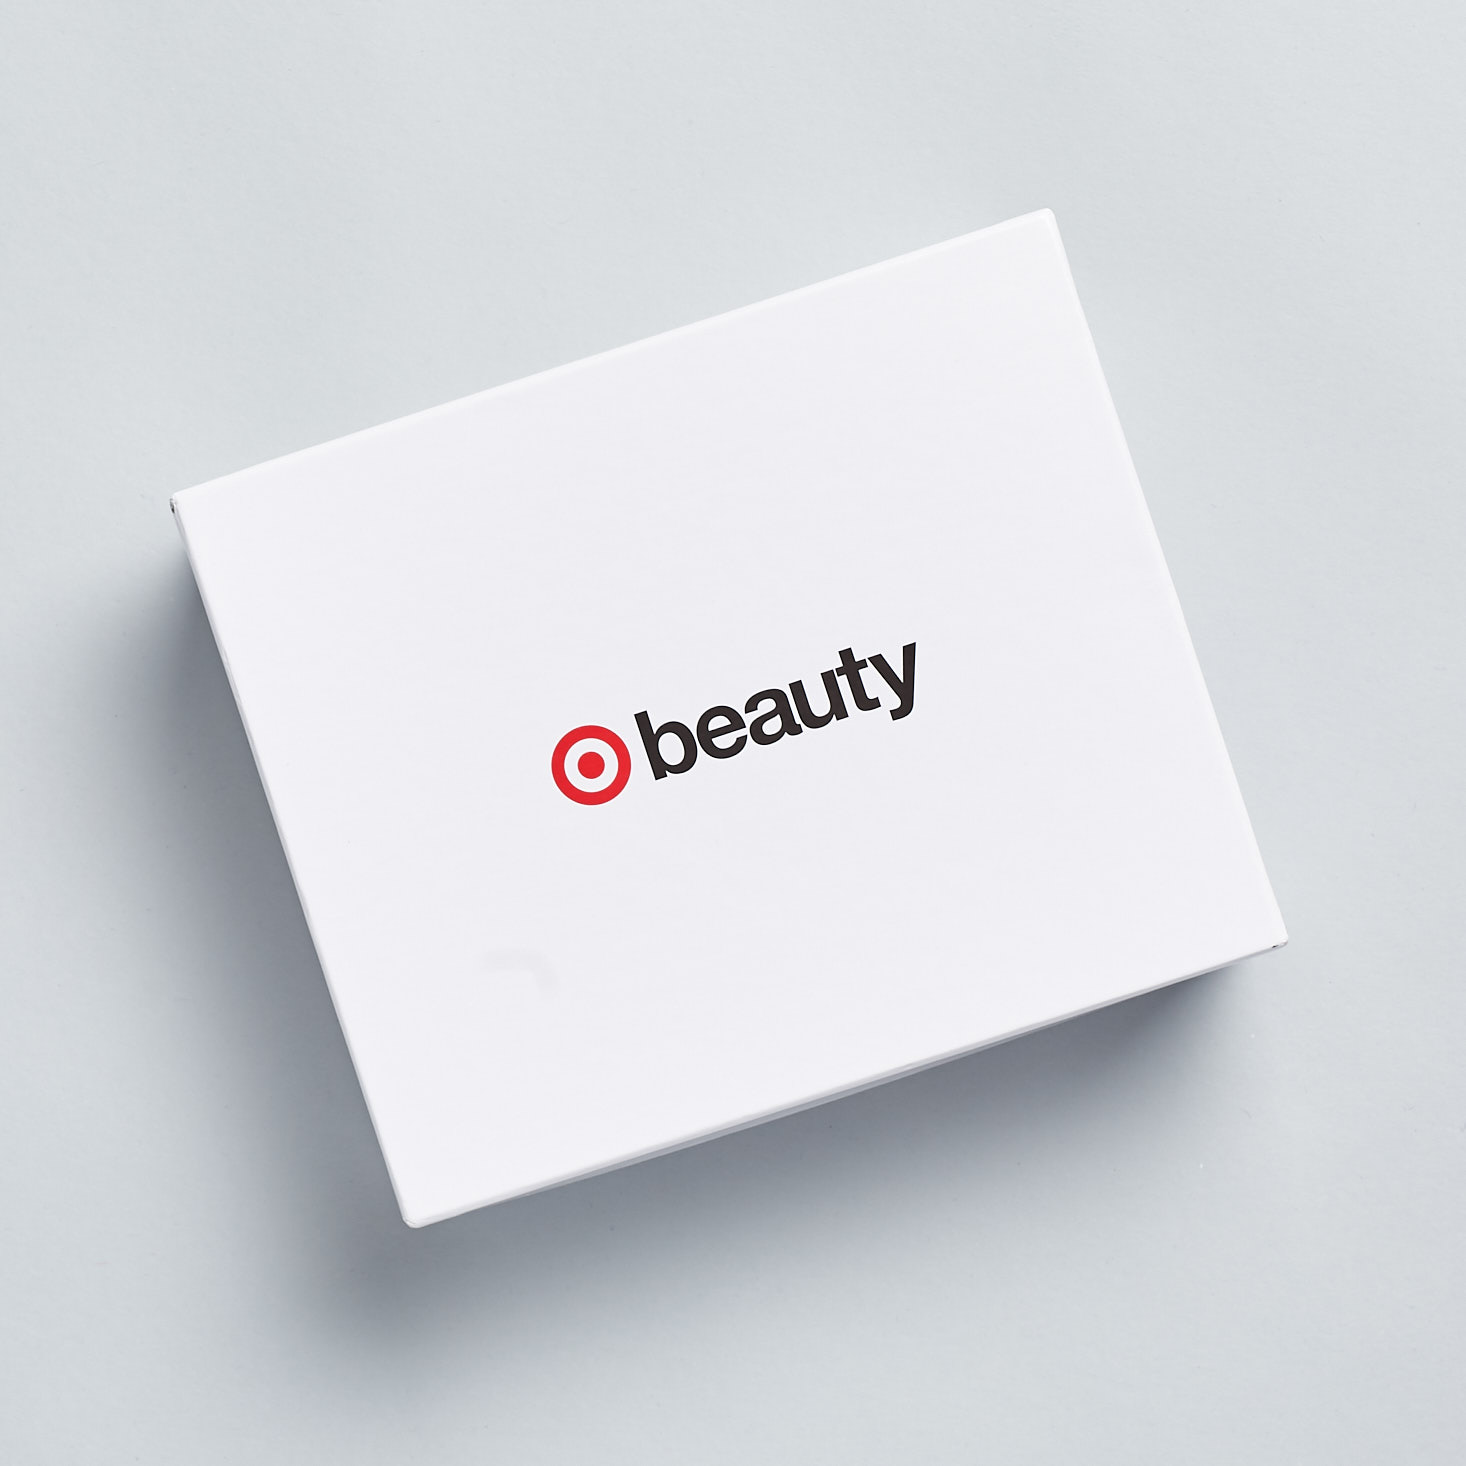 Subscriber Survey: What’s Your Favorite Target Beauty Box Discovery?